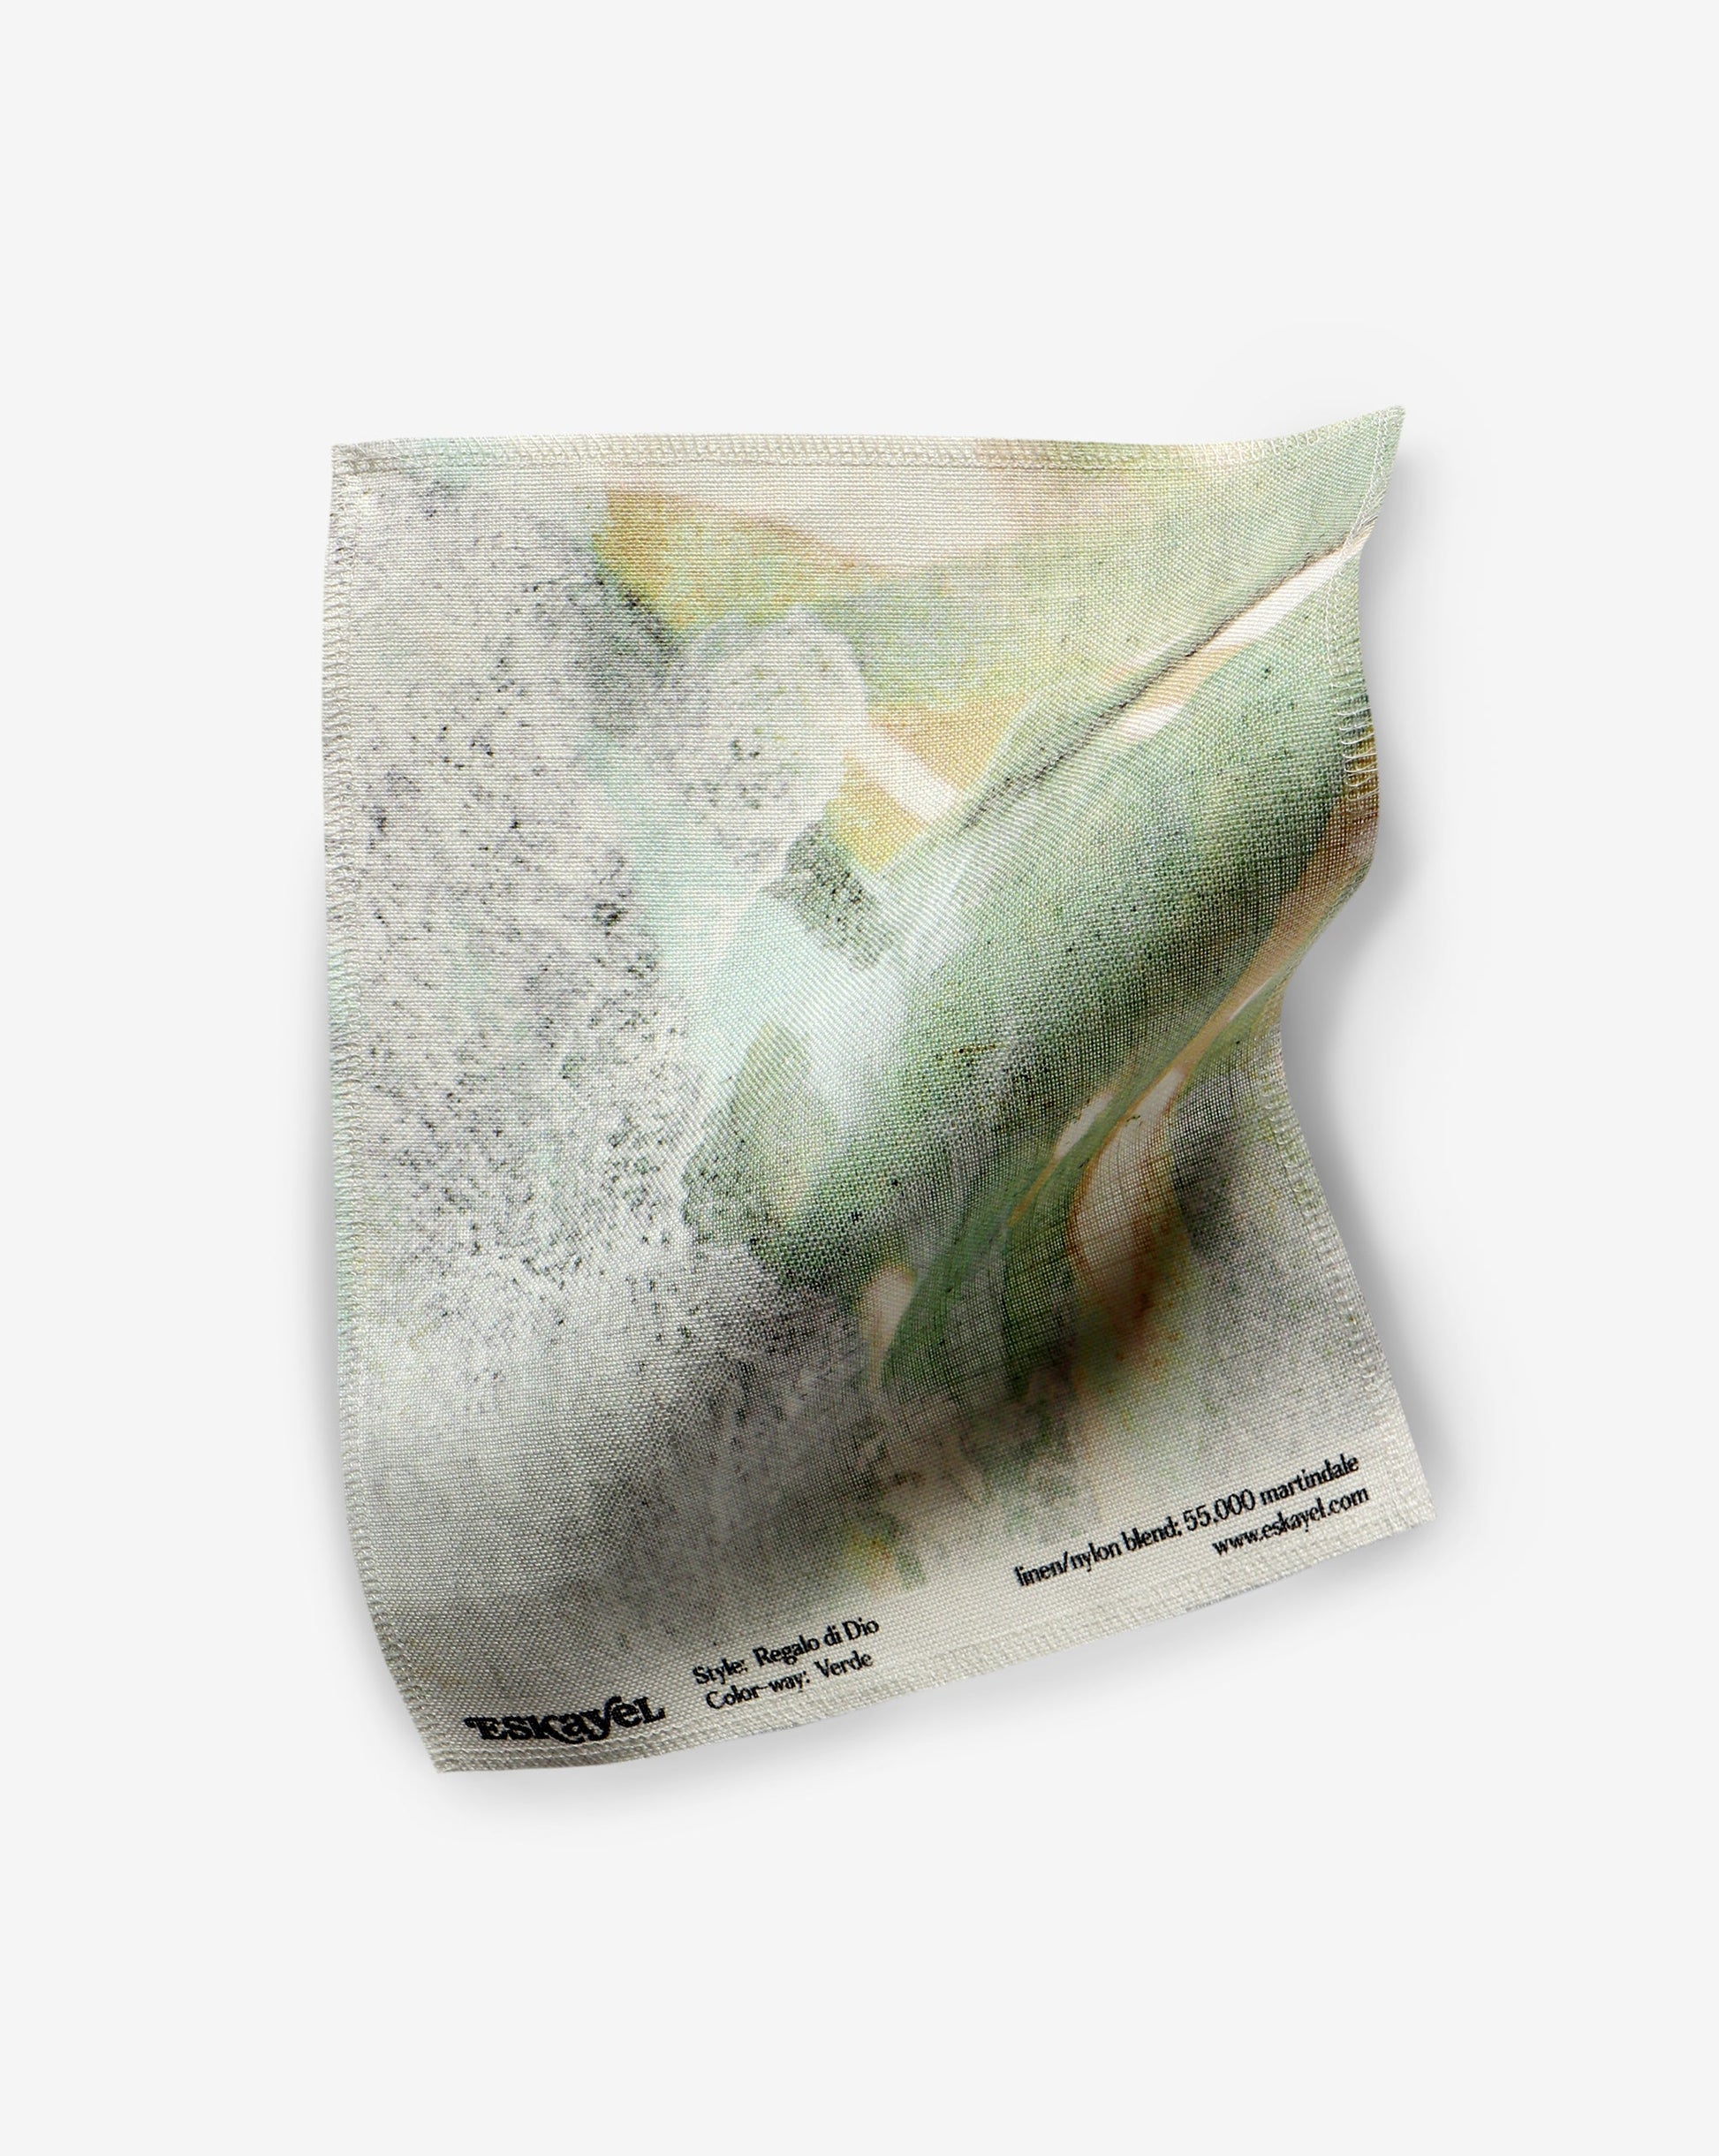 A luxury Regalo di Dio Fabric Verde with a painting on it